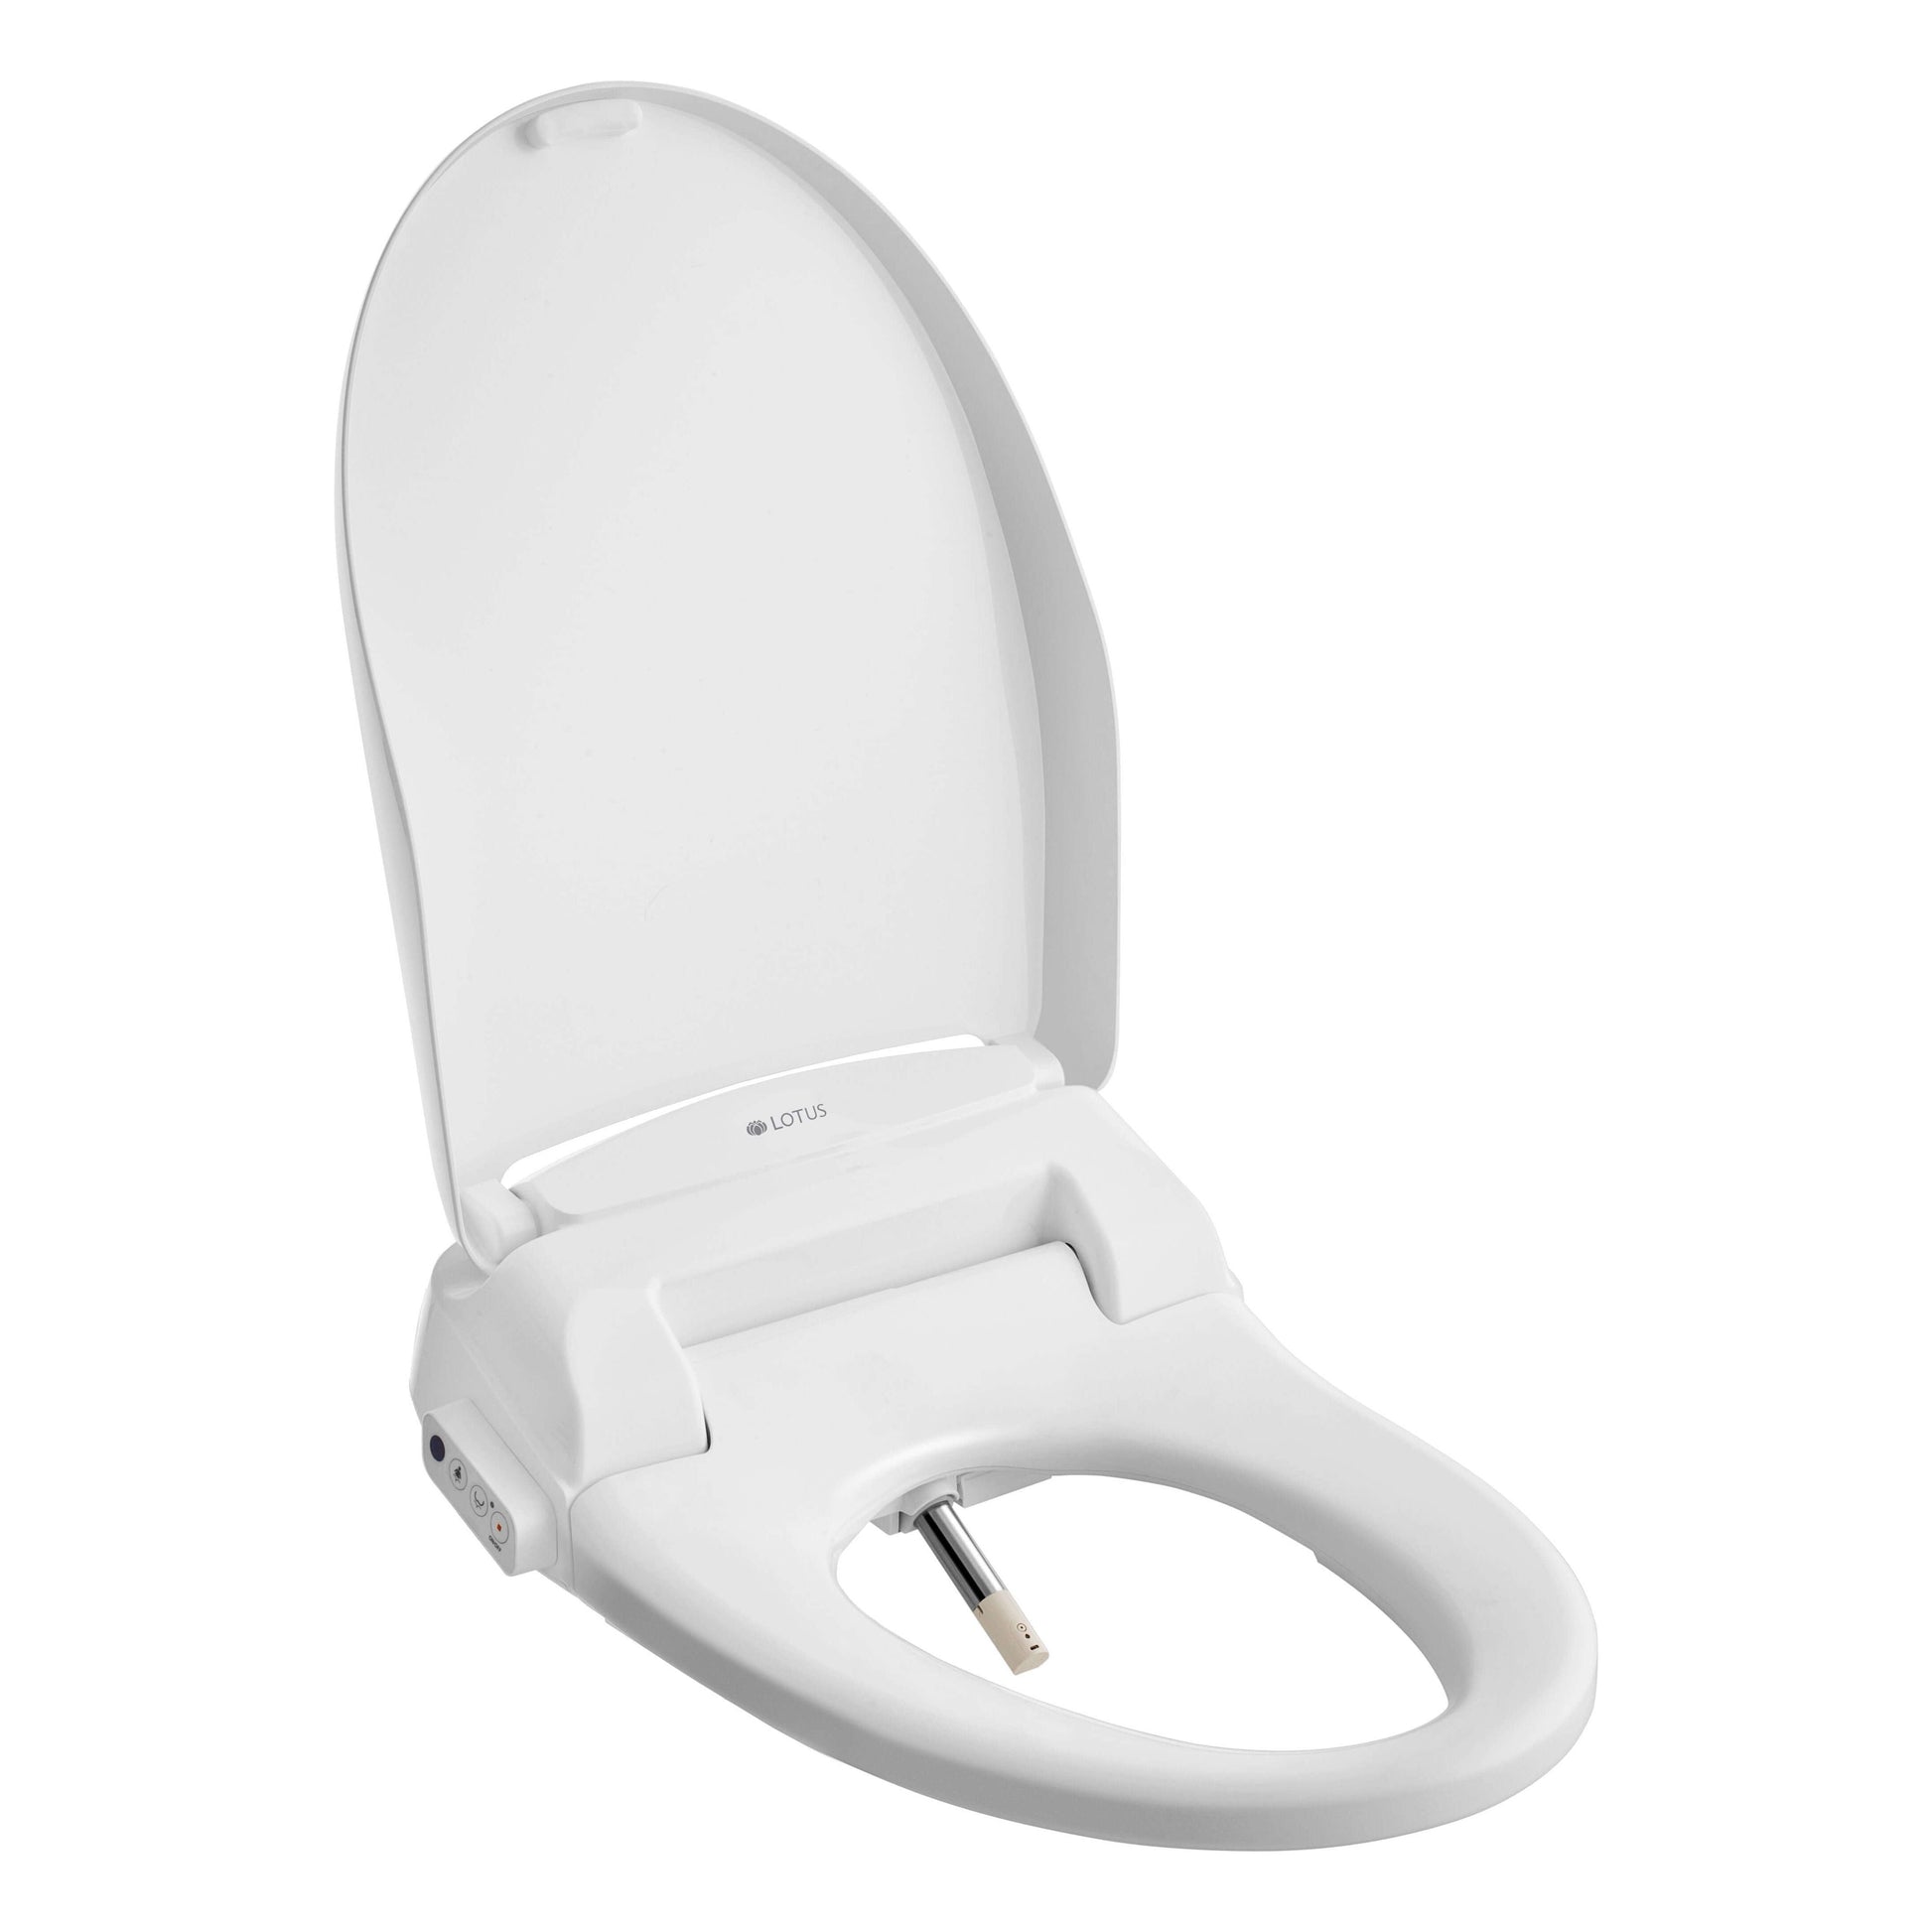 Lotus Bidet Seat ATS-500R - side angled view with lid open